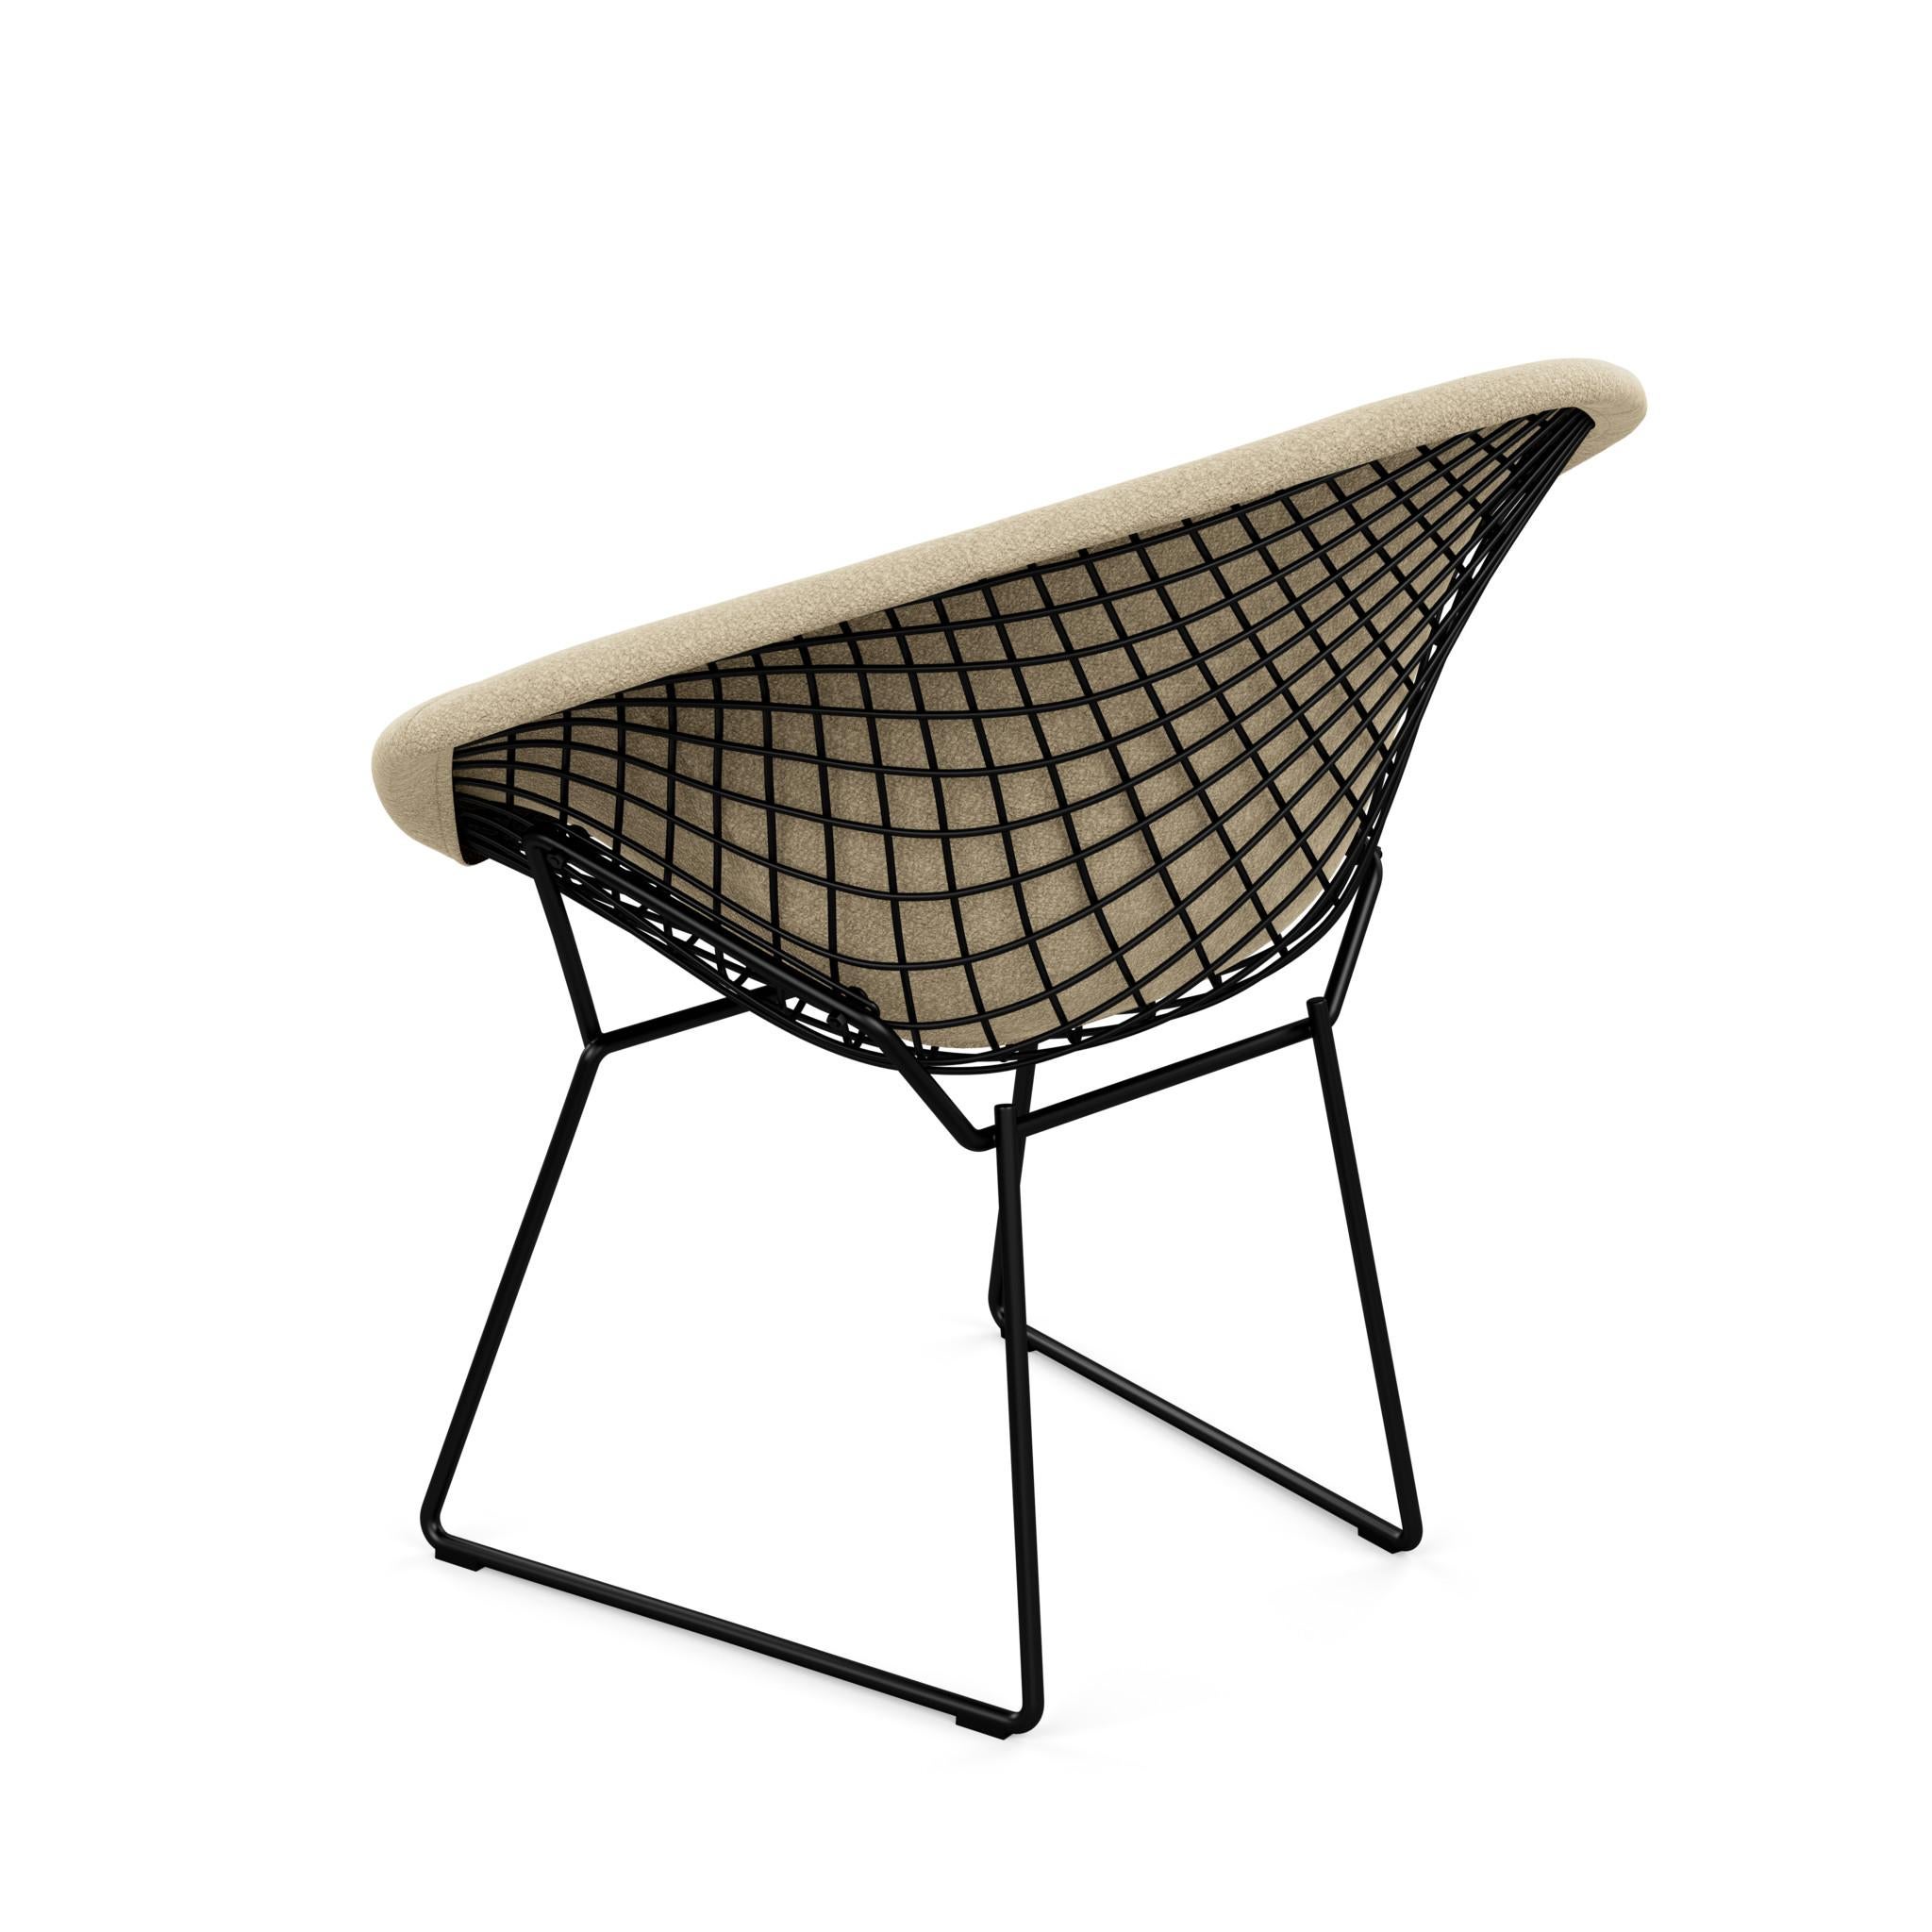 Bertoia’s wire chair collection is among the most recognized achievements of mid-century modern design and a proud part of the Knoll heritage. A fully upholstered cover adds softness and texture to the graceful lines and industrial beauty of Harry